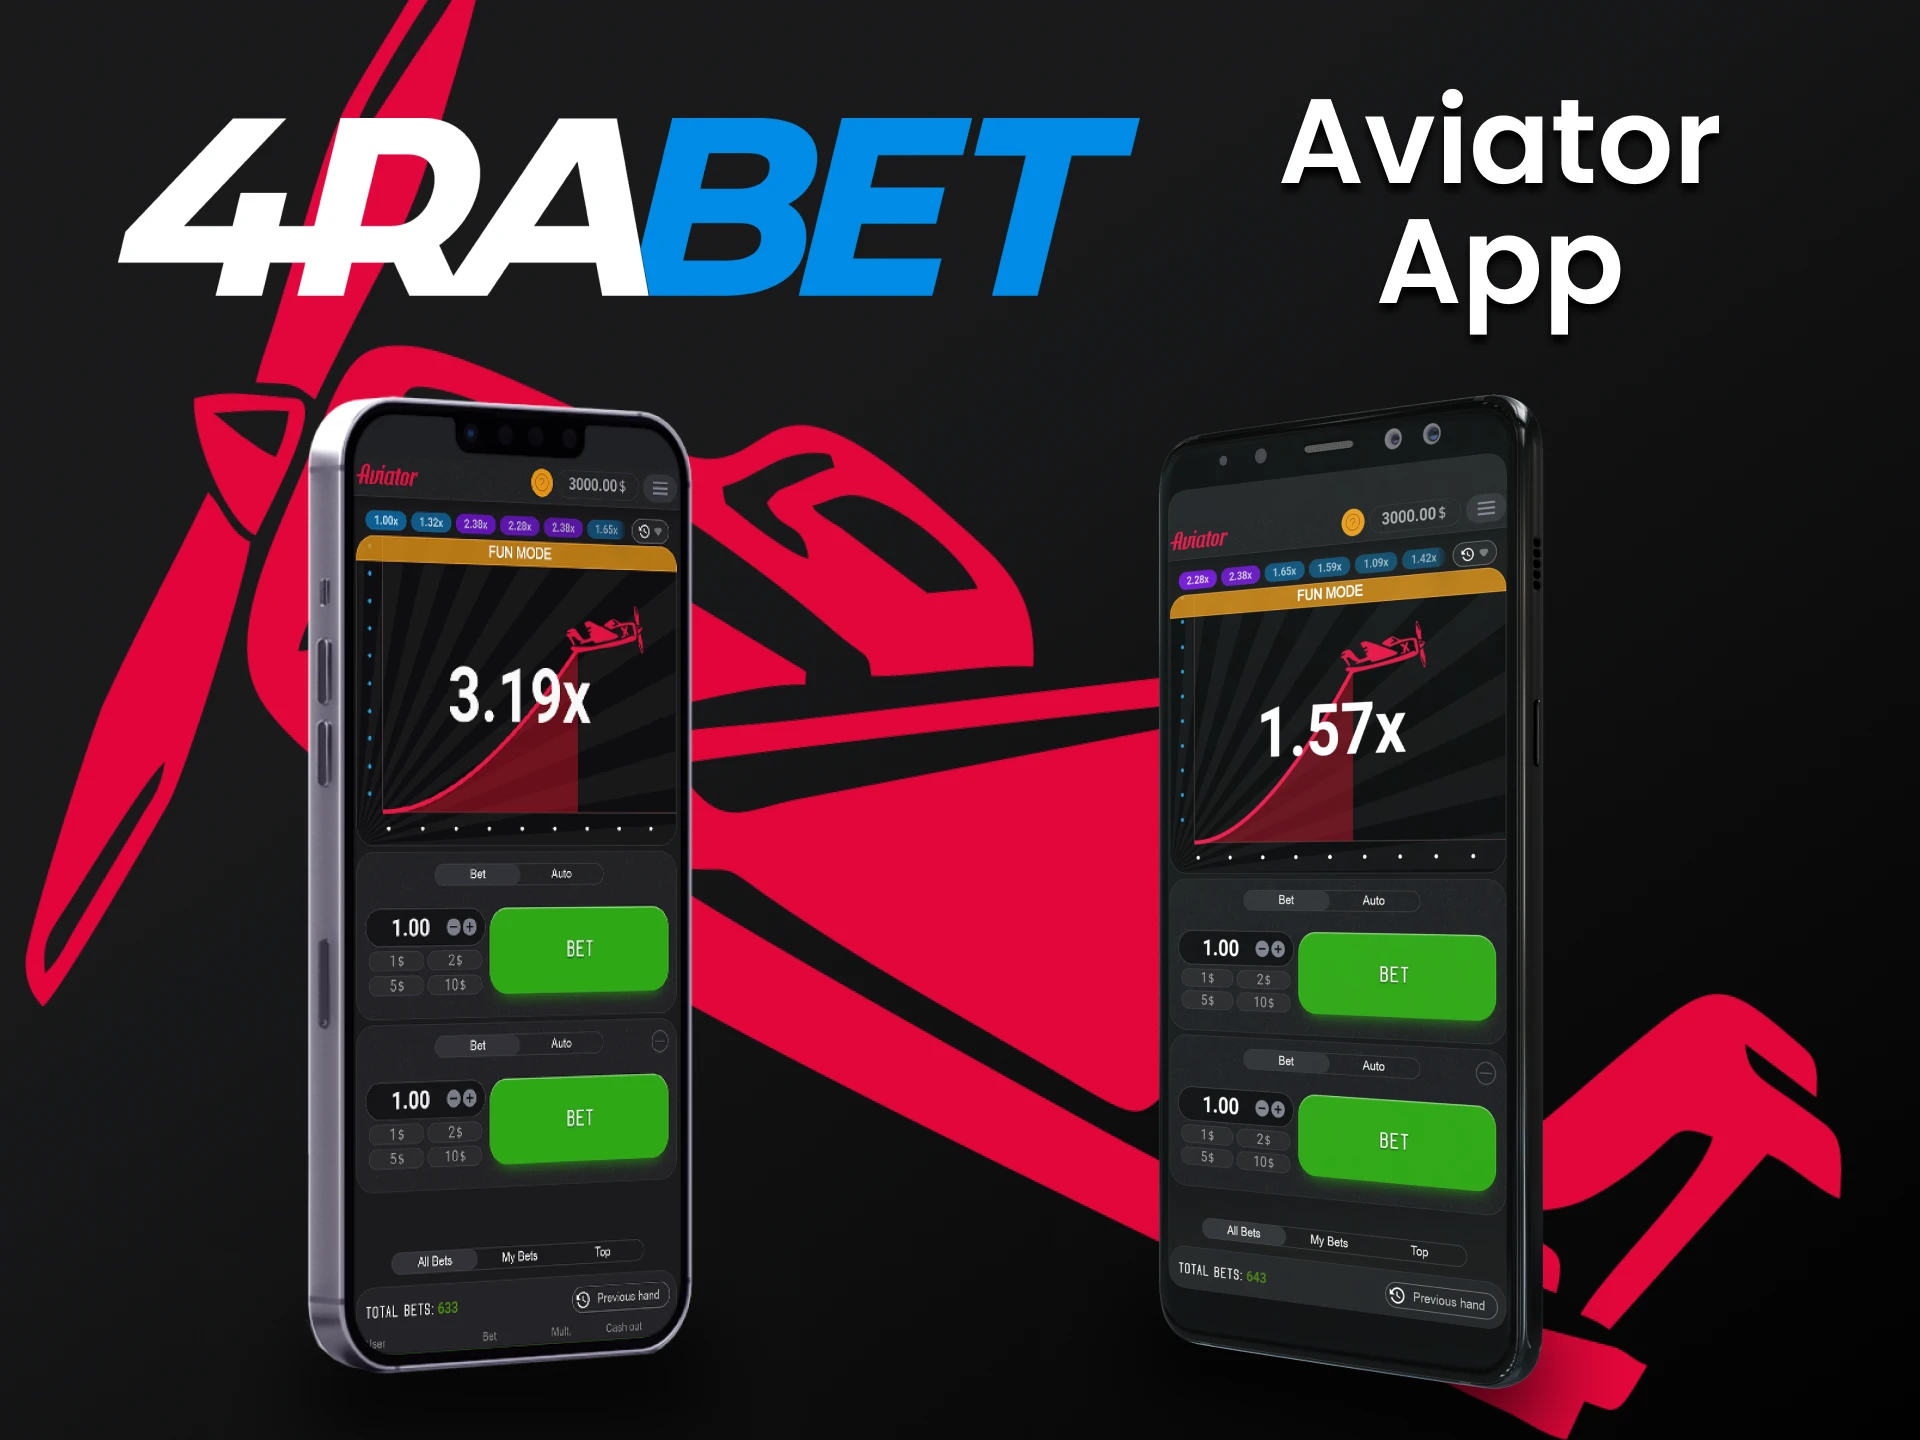 Download the app and play Aviator from 4rabet.